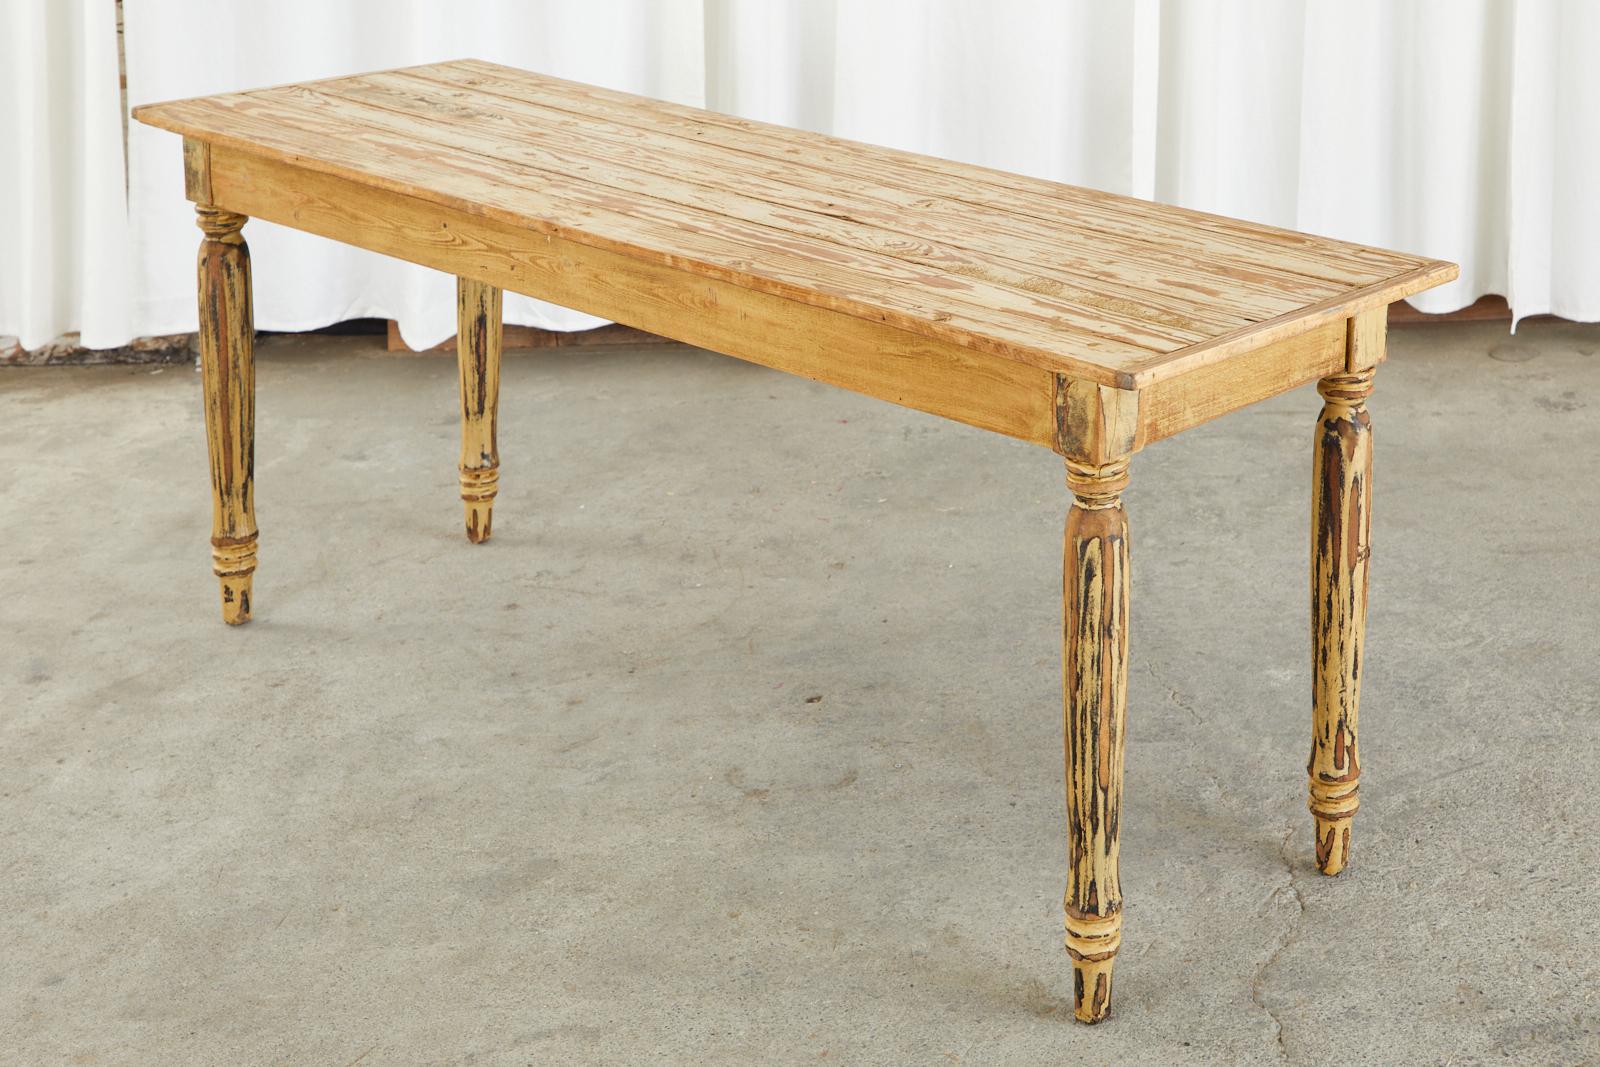 Rustic American Country Painted Pine Farmhouse Harvest Table